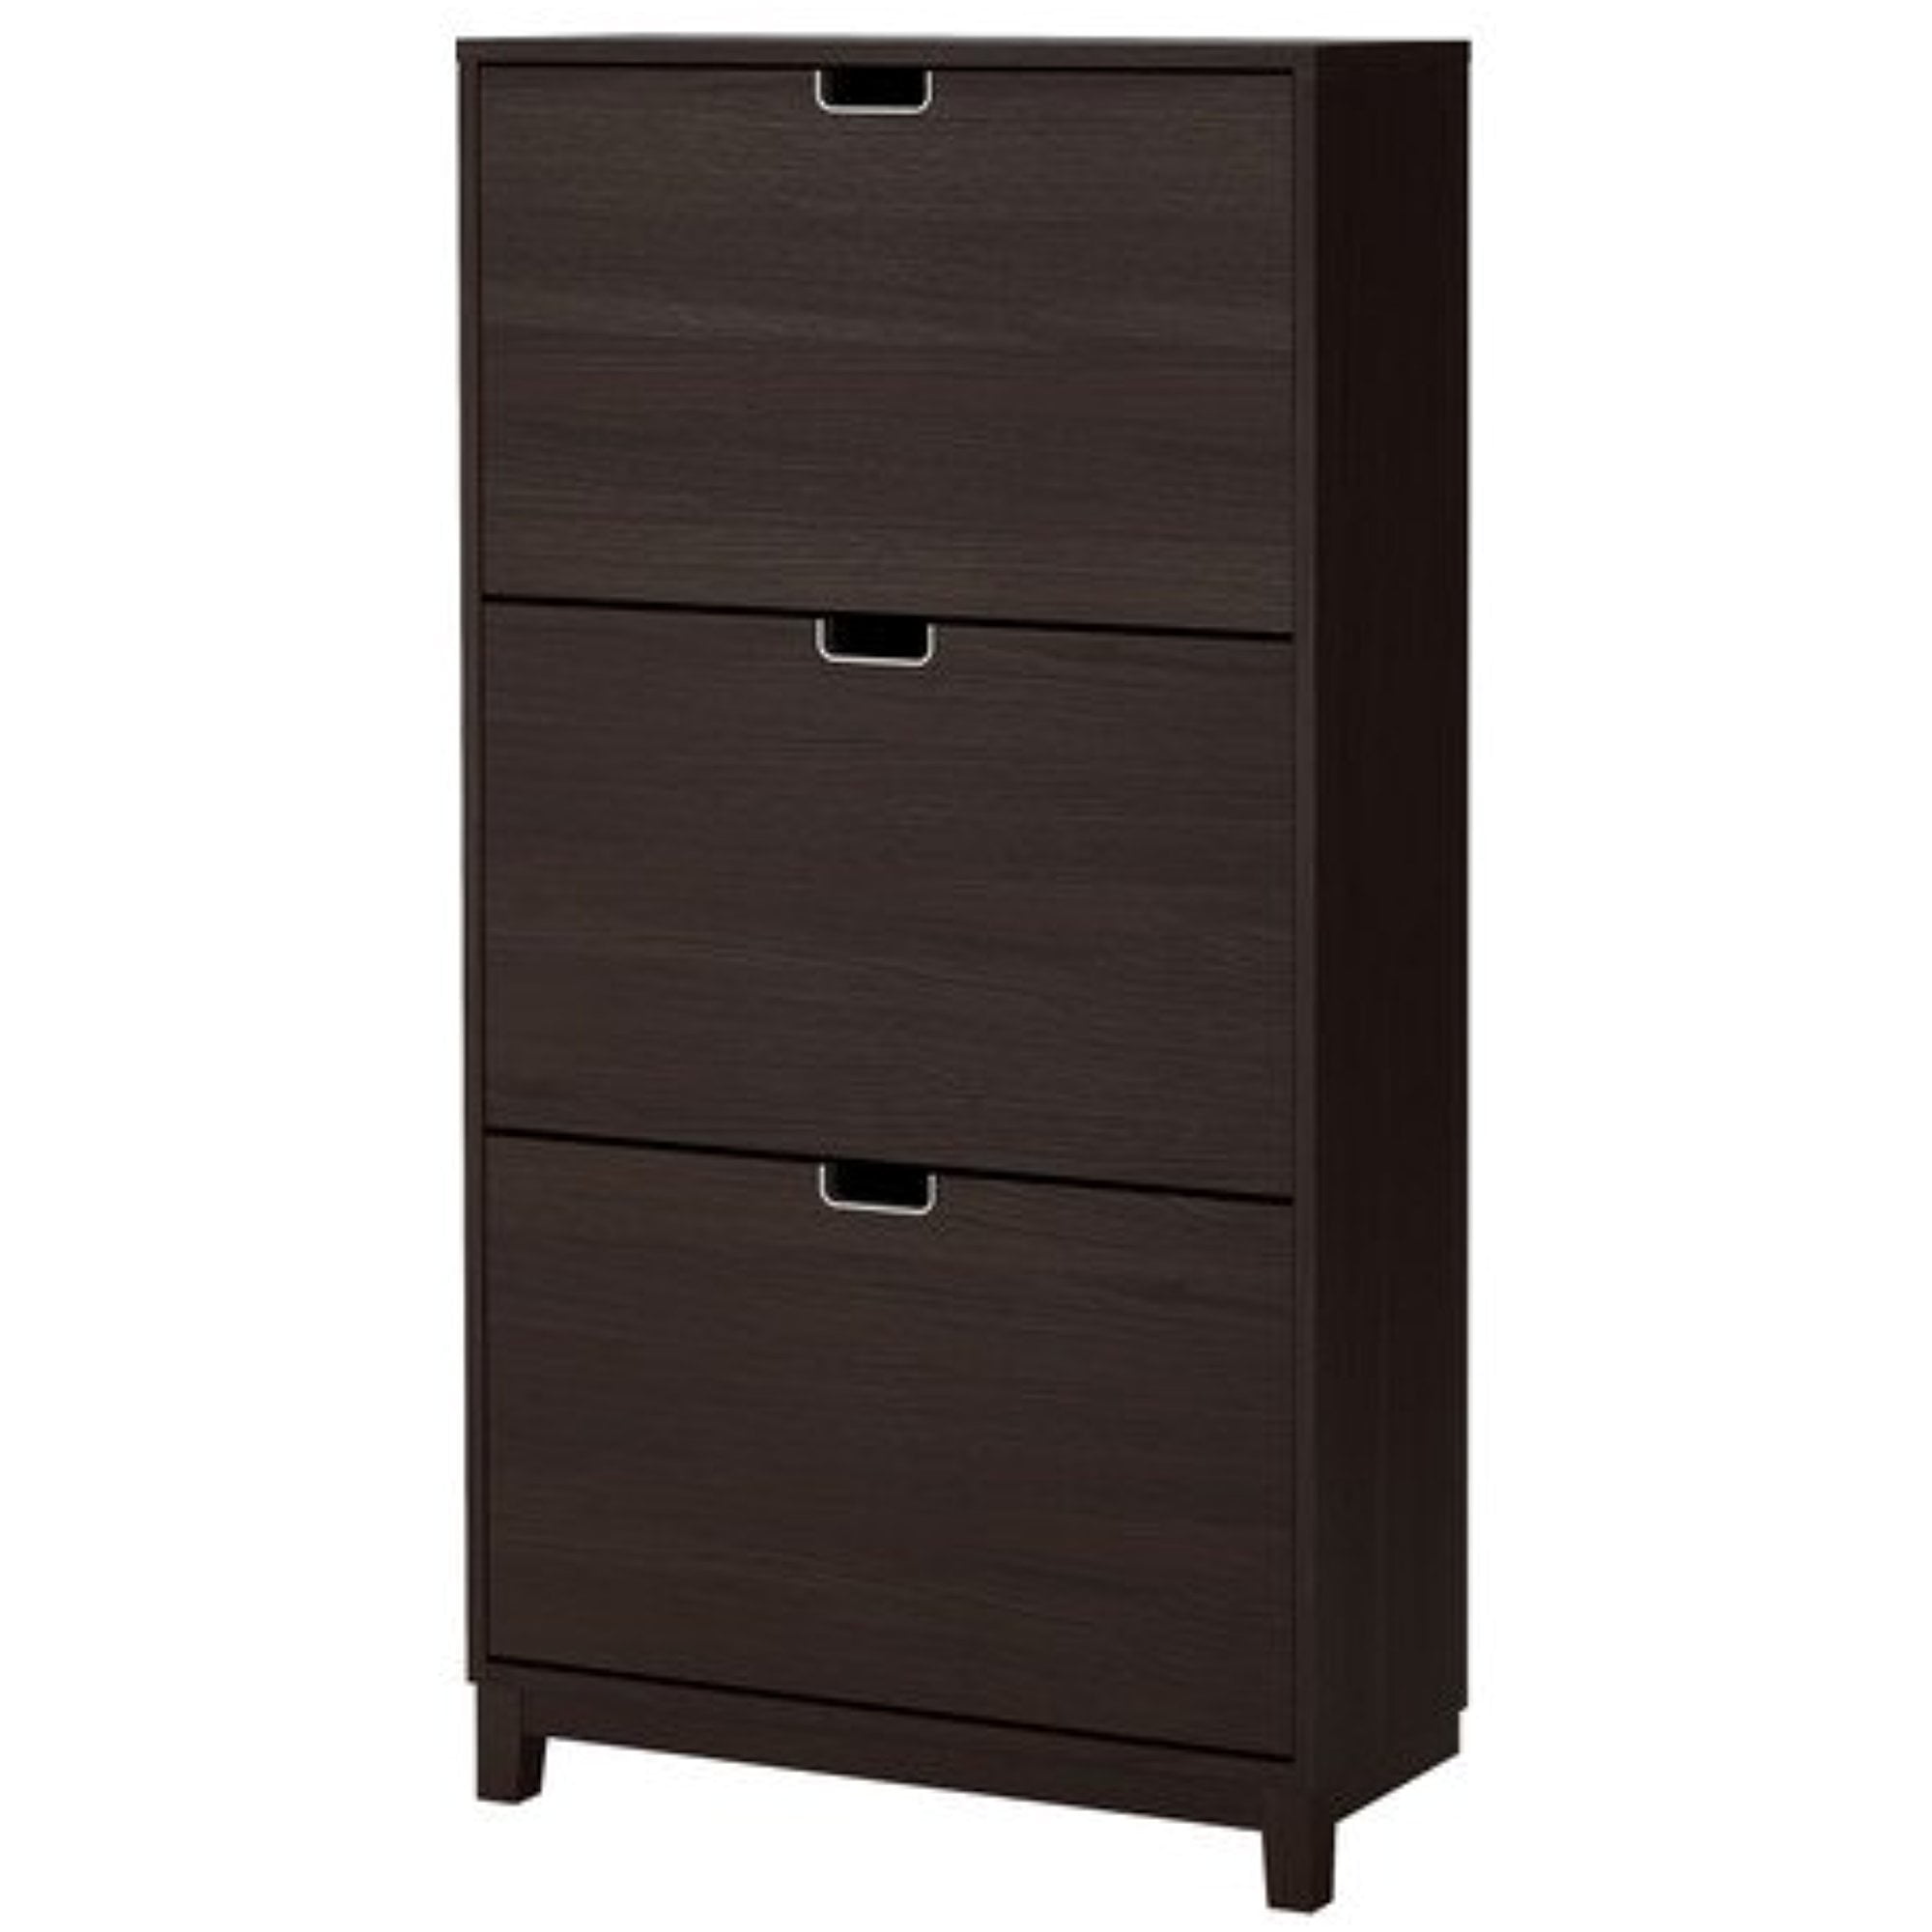  Ikea ST LL Shoe cabinet  with 3 compartments 3626 292917 